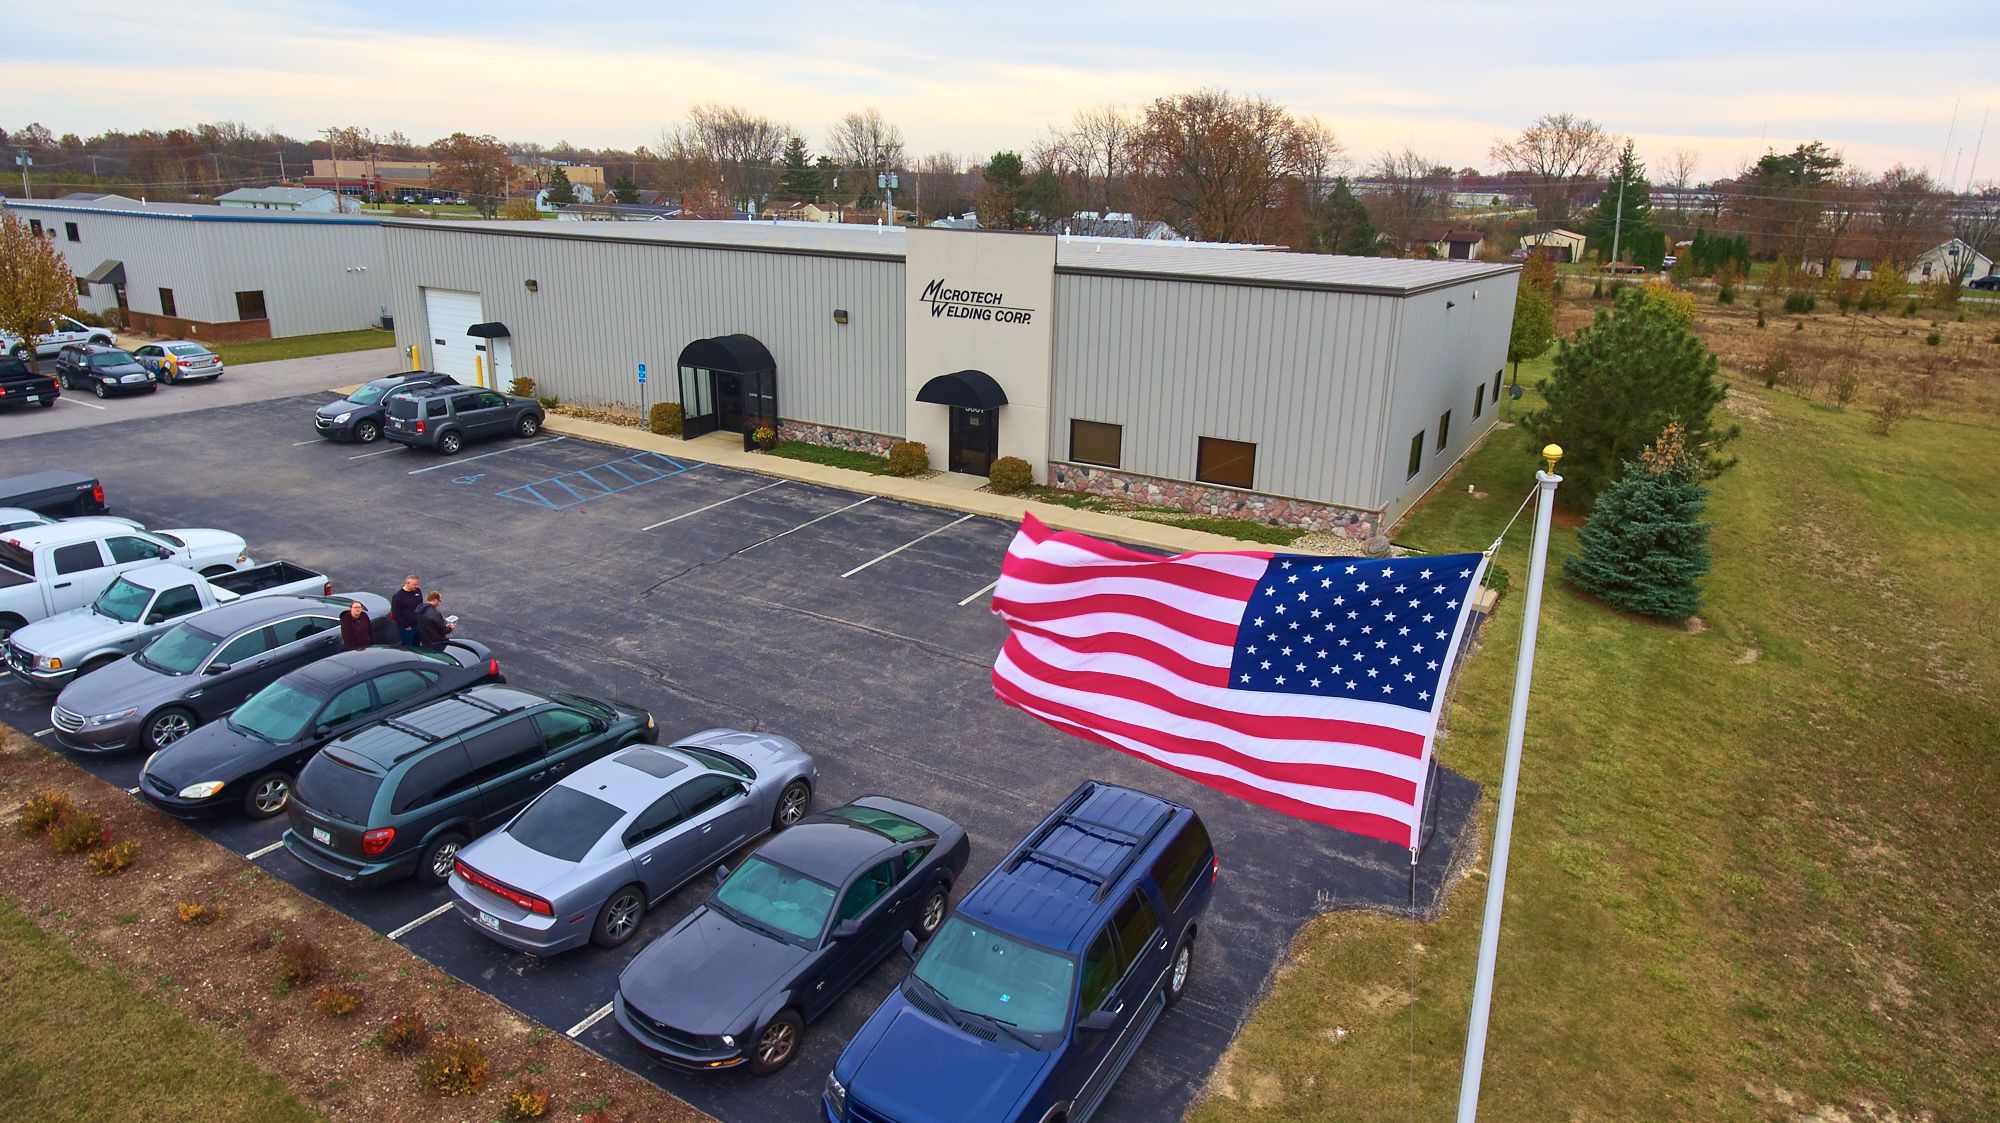 Outside the Fort Wayne Microtech facility with American Flag waving in the breeze